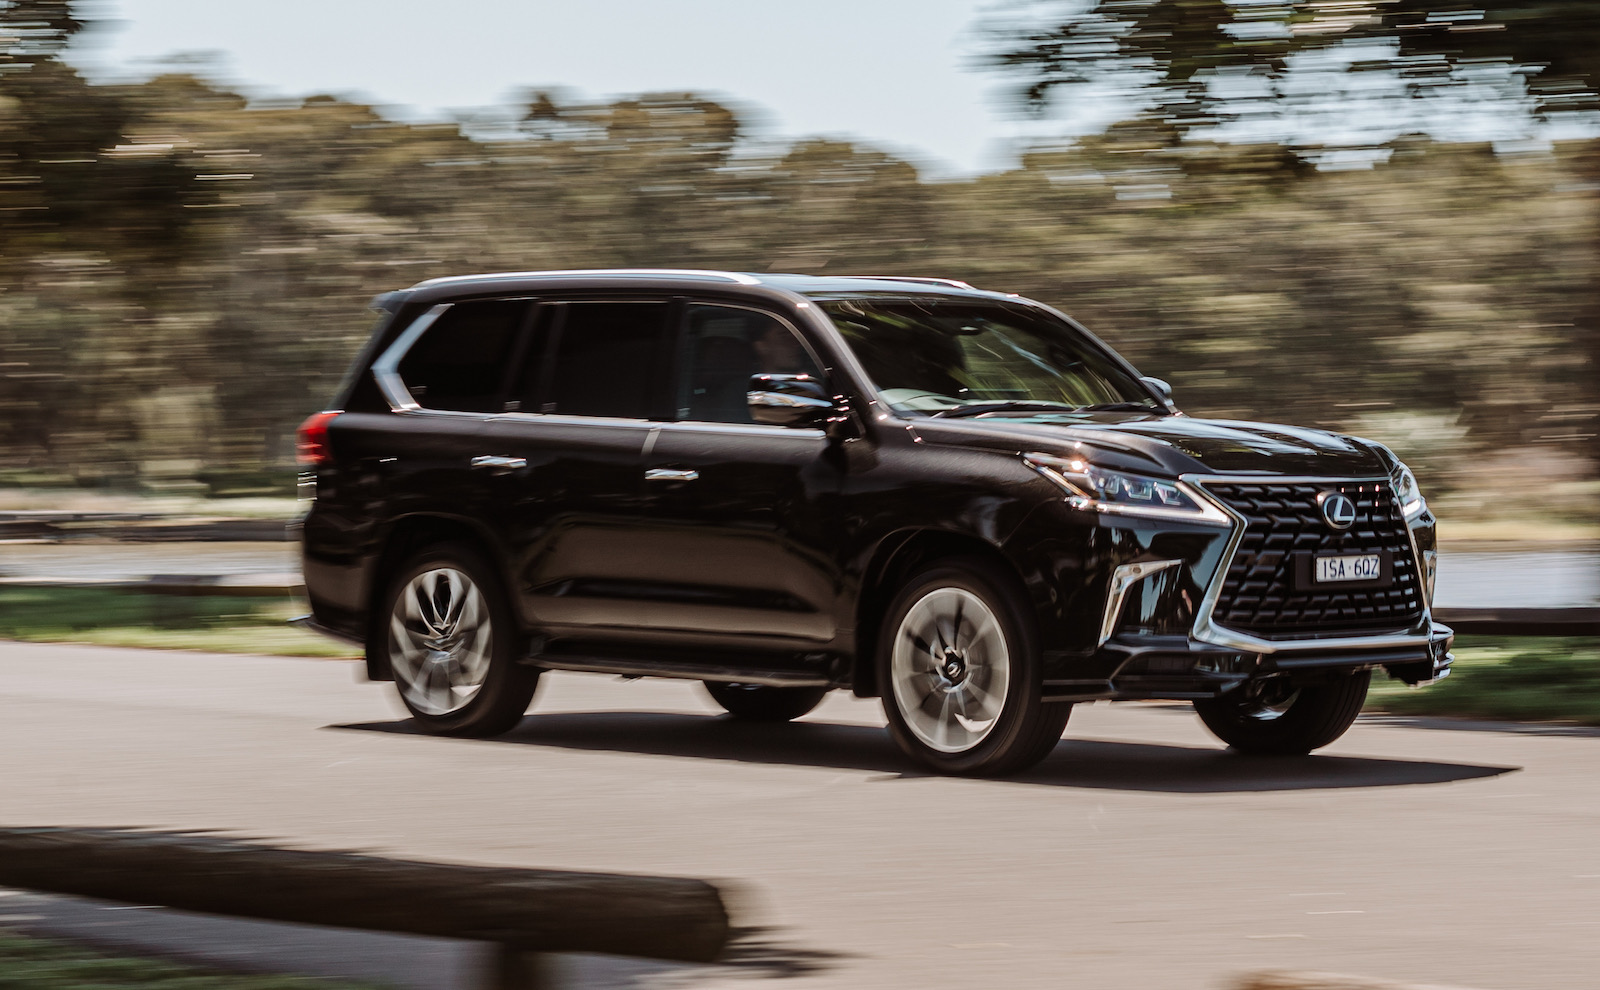 2021 Lexus LX 570 S facelift announced, on sale in